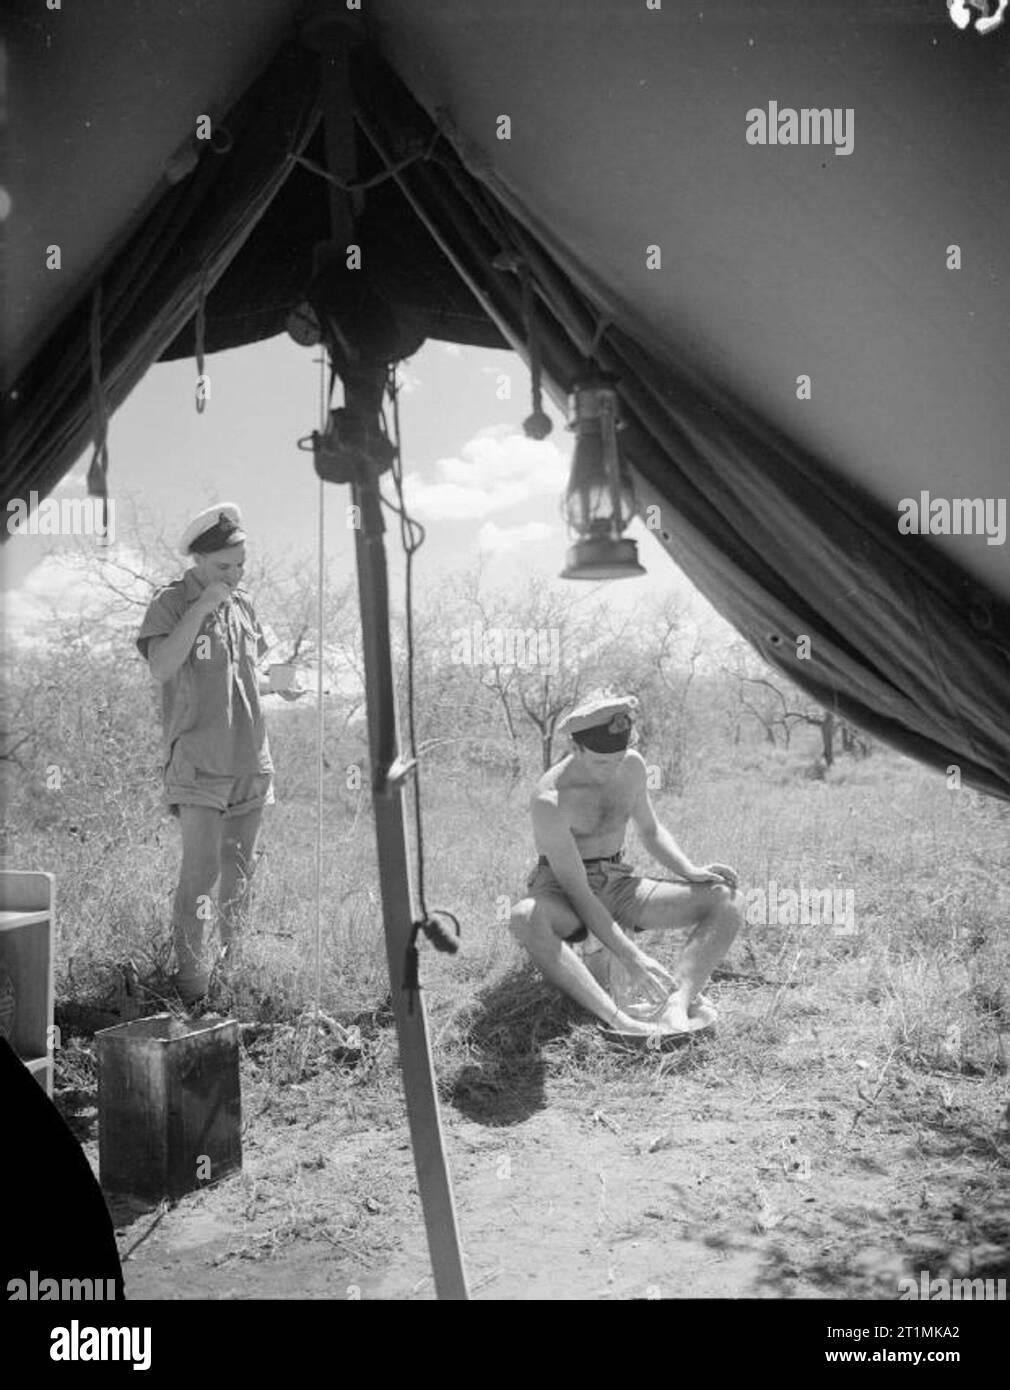 The Royal Navy during the Second World War As seen from inside their tent, two pilots of 881 Squadron, Fleet Air Arm outside their quarters at McKinnon Road, East Africa. The Royal Naval Air Station was built deep in the African bush as a base for squadrons of the Fleet Air Arm. One of the men is taking a foot bath against dust and flies. Stock Photo